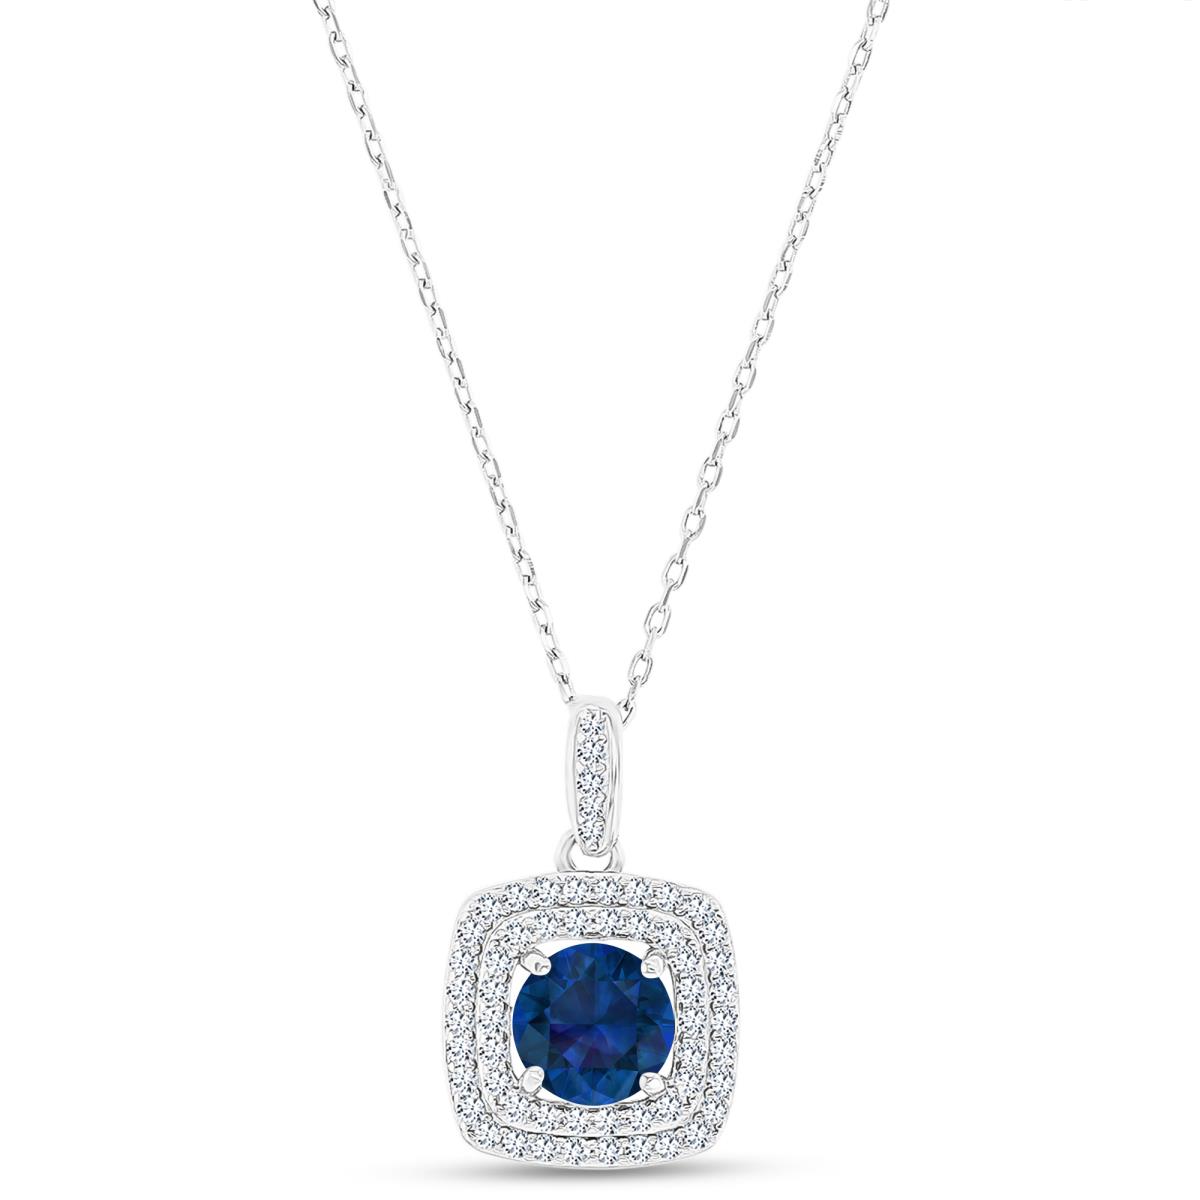 Sterling Silver Rhodium 7mm RD Cr Blue Sapphire/ Cr White Sapphire Cushion Double Halo 16"+2" Necklace